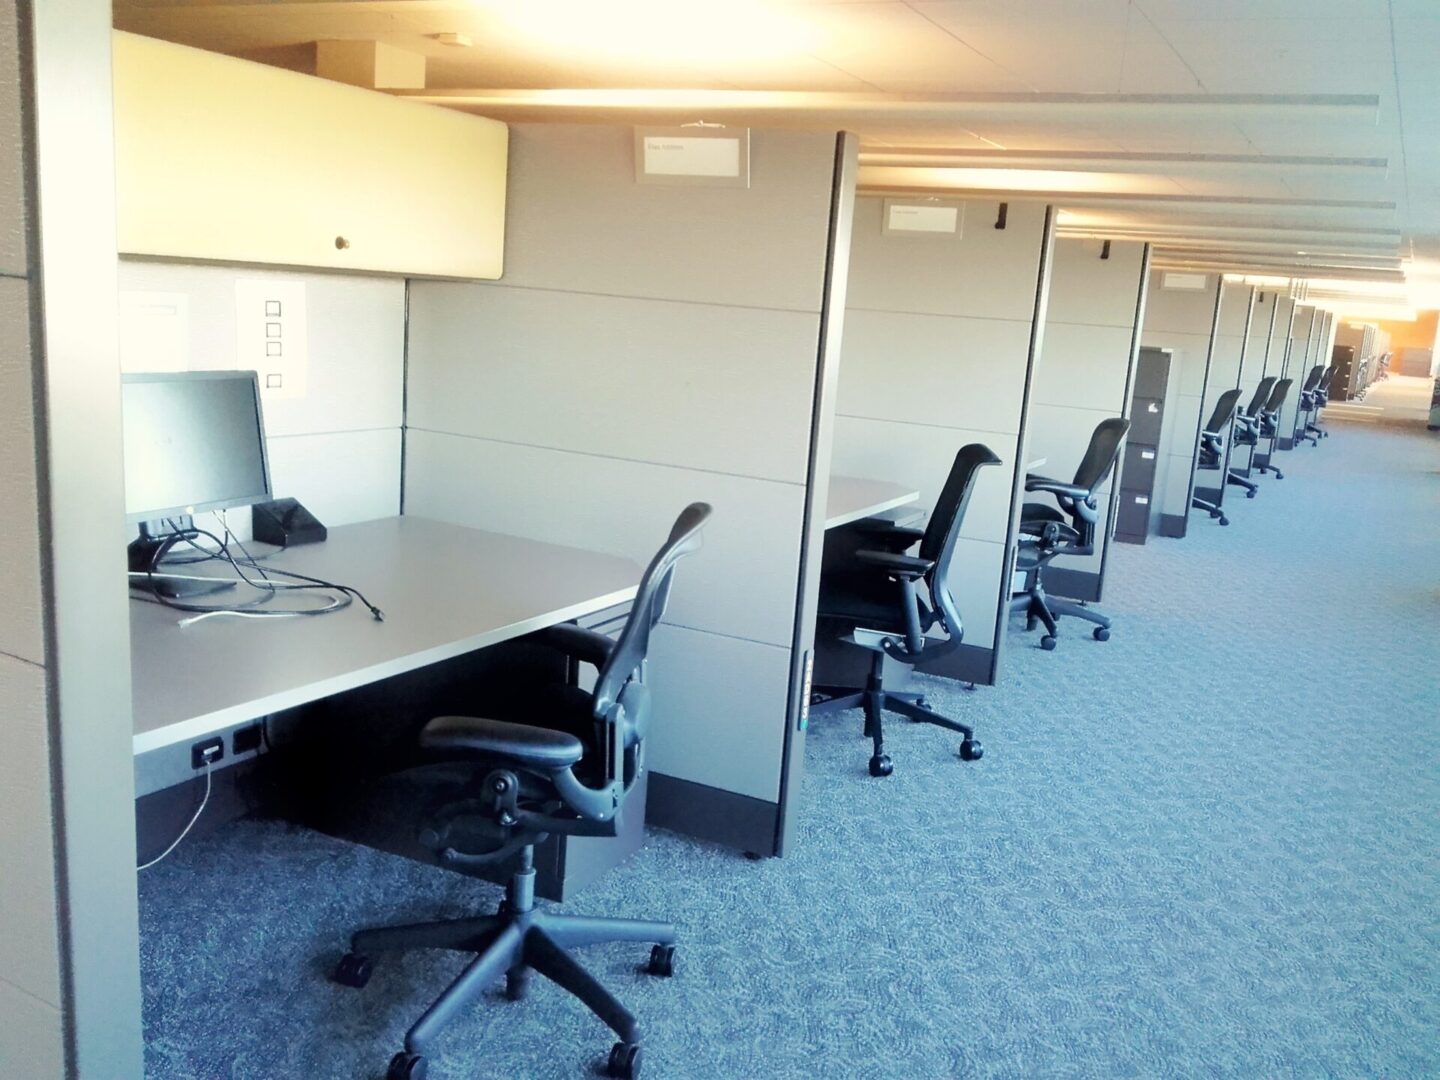 A row of cubicles with chairs and tables in it.